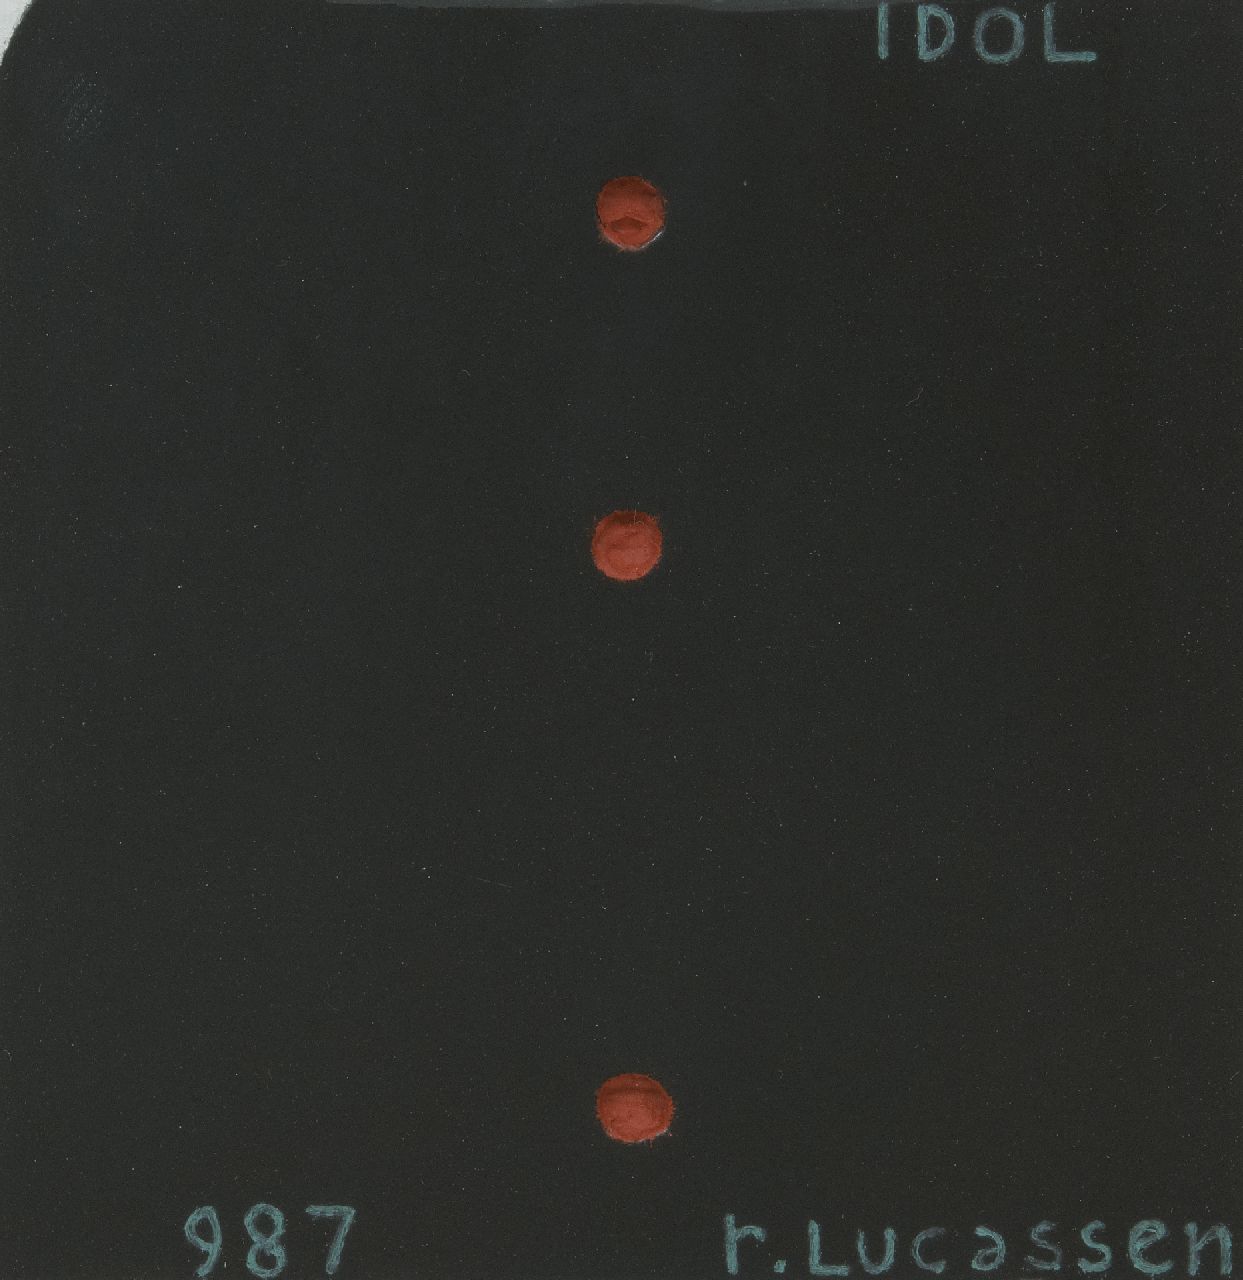 Lucassen R.  | Reinier Lucassen | Paintings offered for sale | Idol noir, 1987 (theoretical model), oil on corrugated cardboard 34.0 x 34.0 cm, signed l.r. and dated 1987